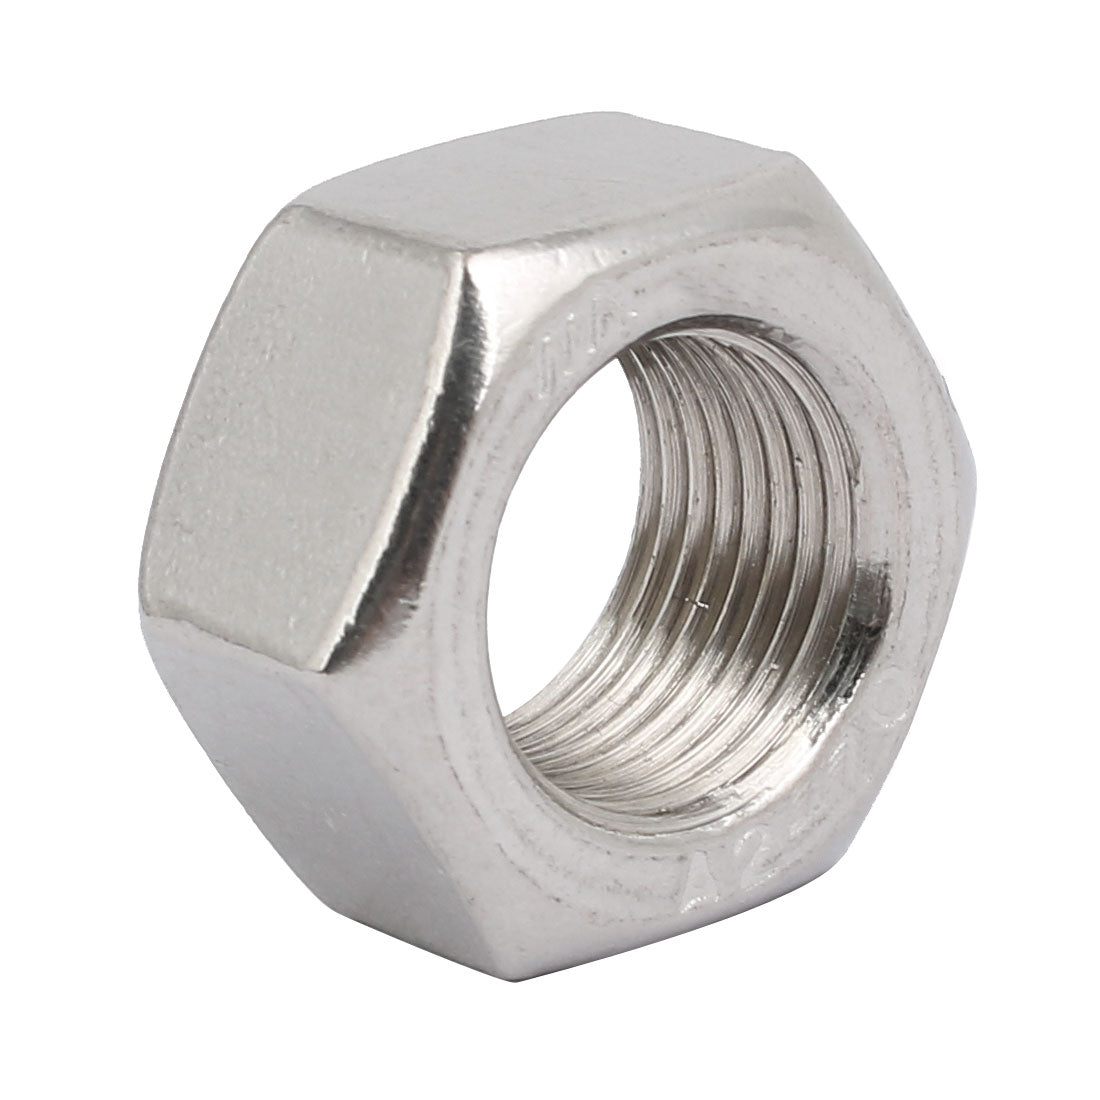 uxcell Uxcell Hex Nuts, M18x1.5 UNF 304 Stainless Steel Thread Hexagon Nut 4pcs